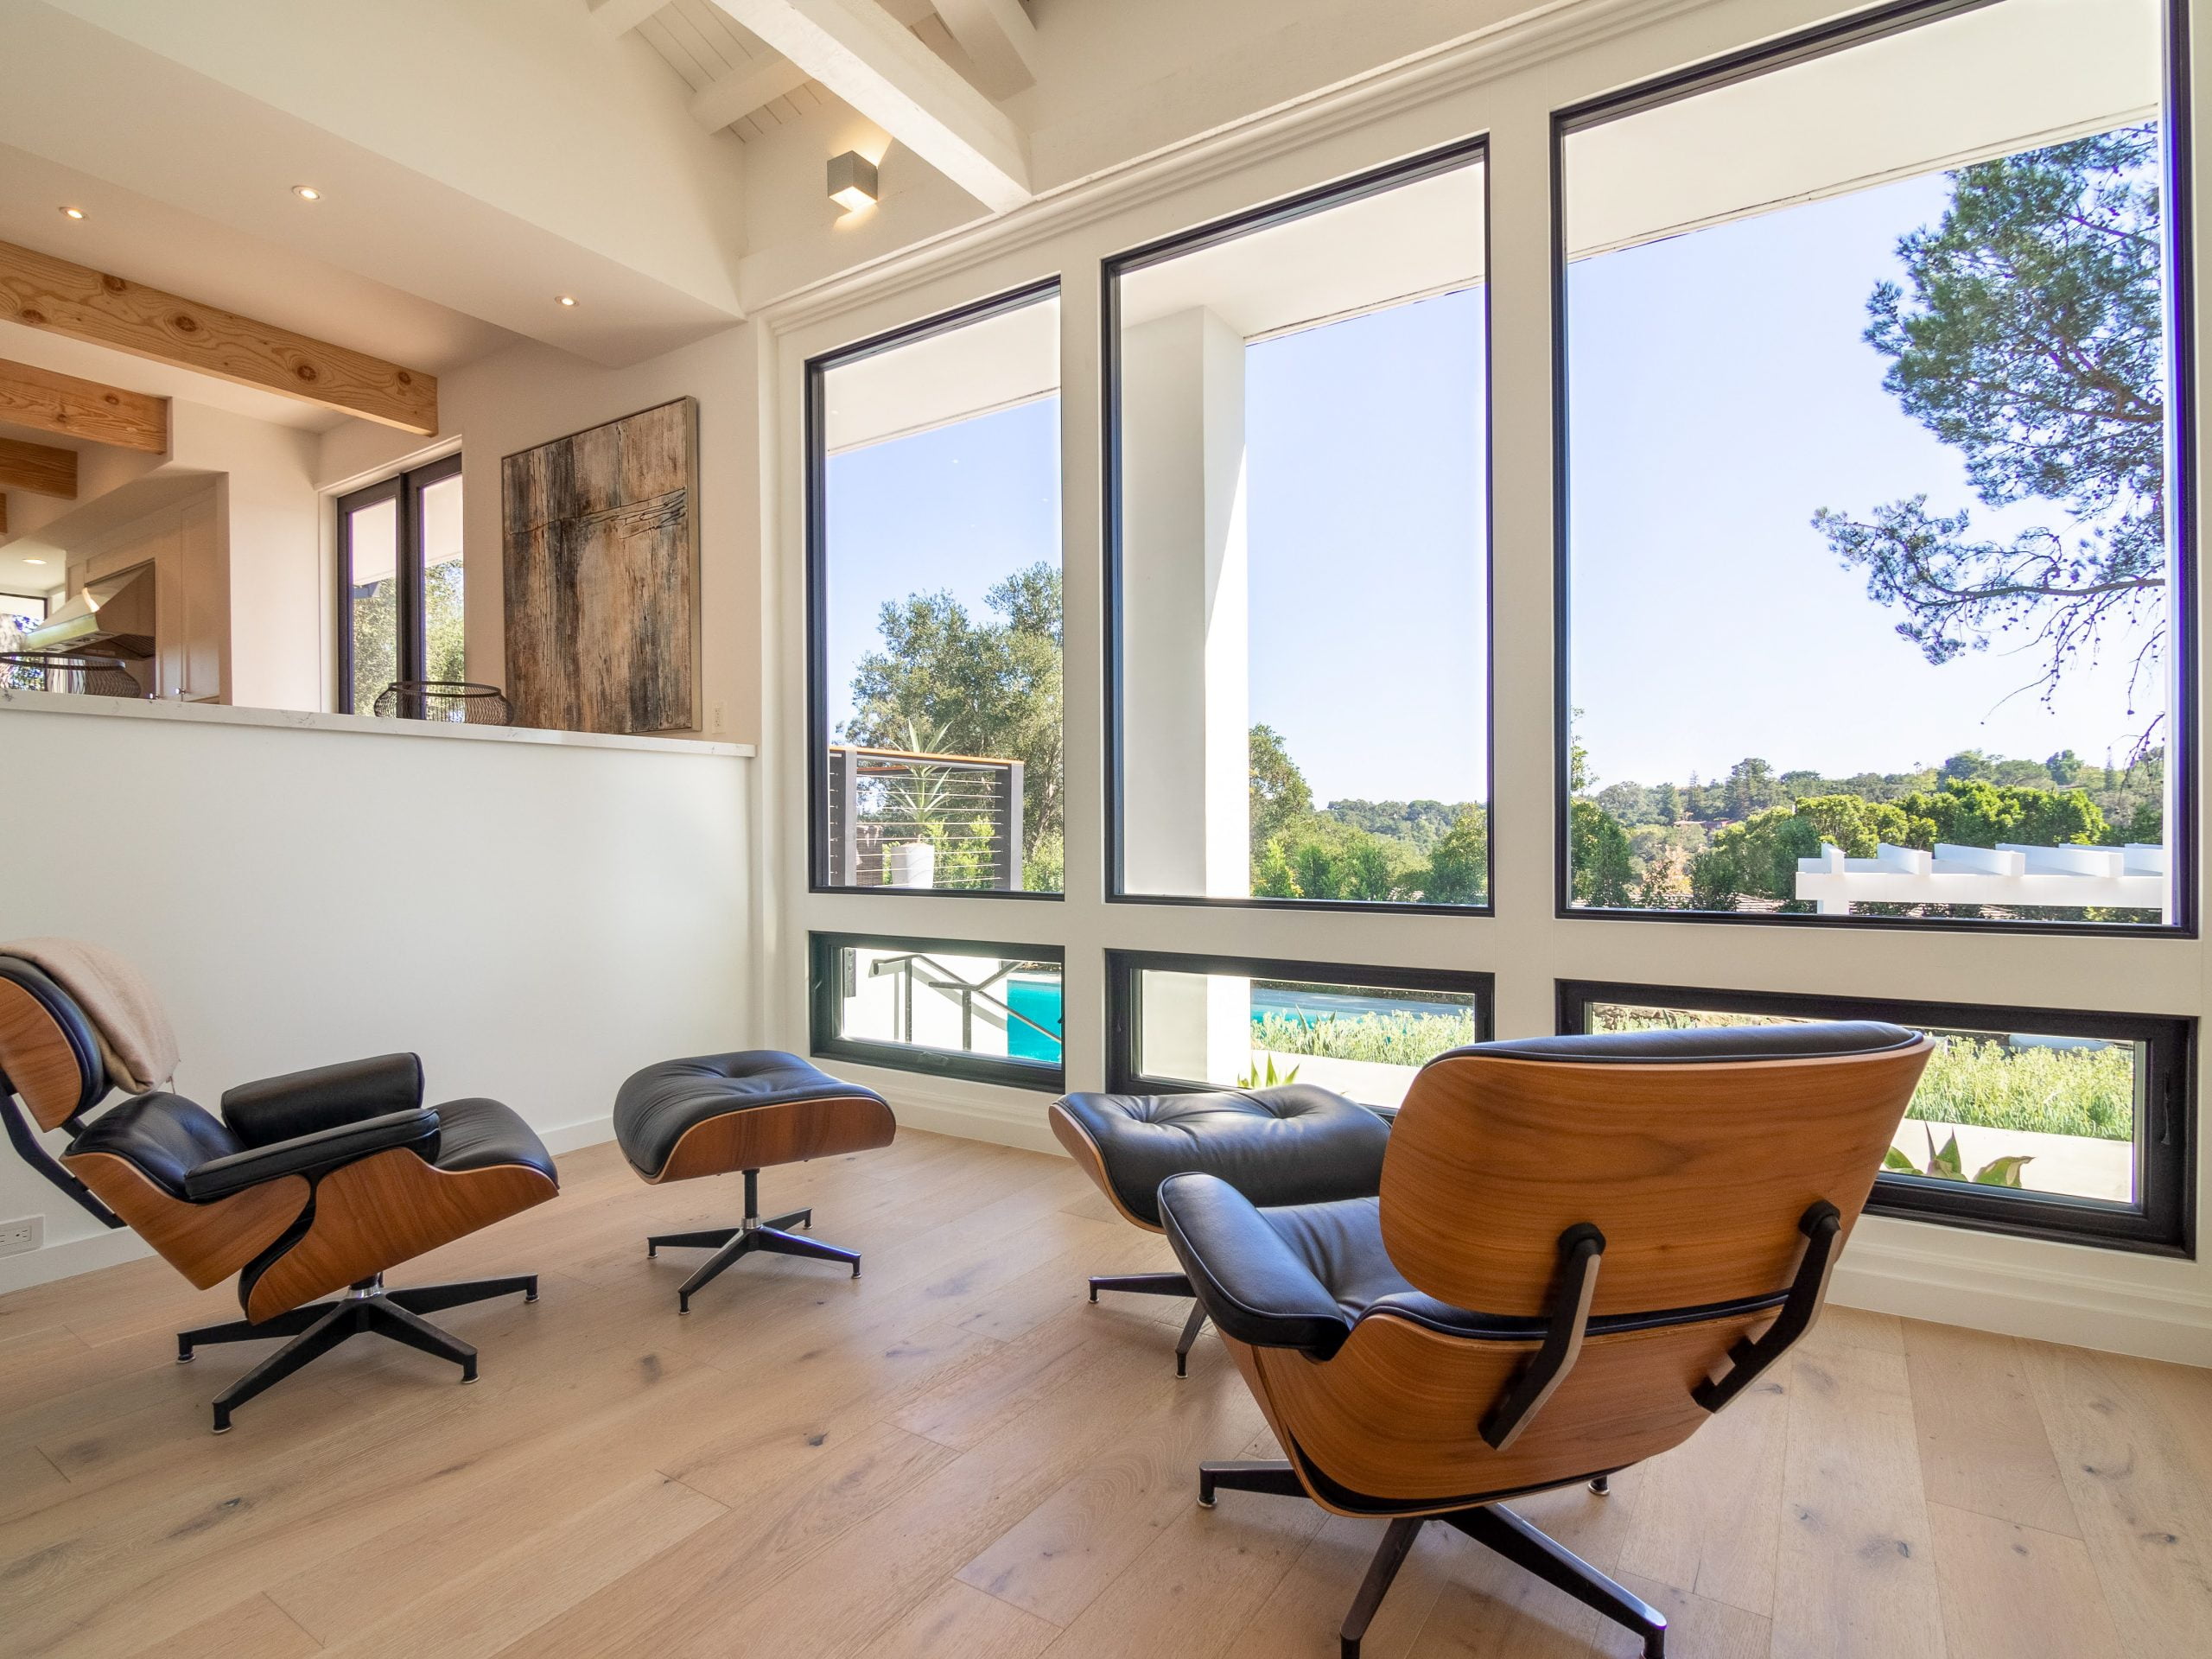 Chair set against a window, featured in the Real Estate Media section of Roto Flight's company imagery.